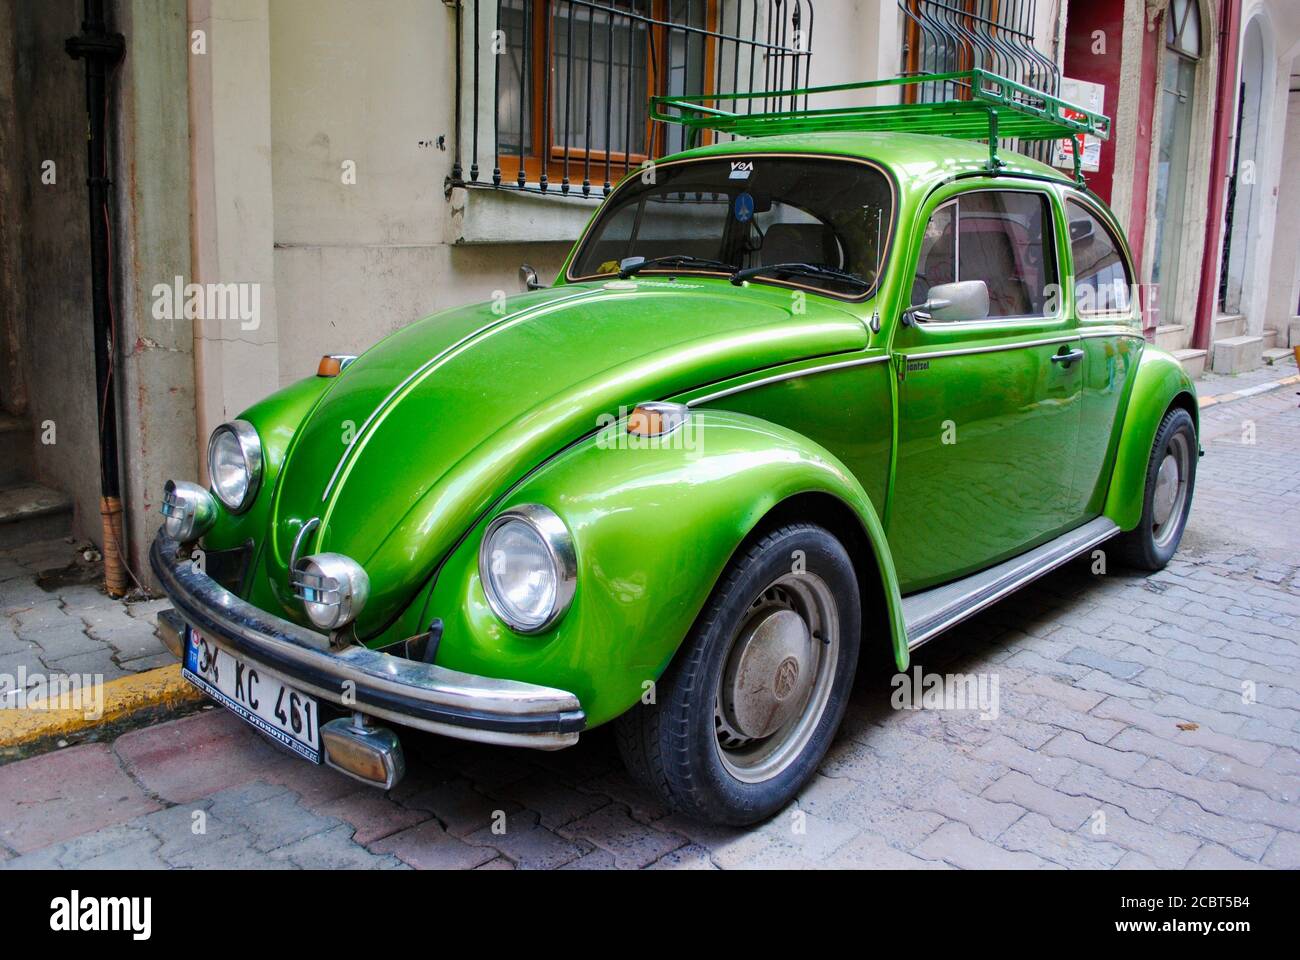 A green shining classic Volkswagen Beetle car parked on an an old street in Istanbul.  Stock Photo